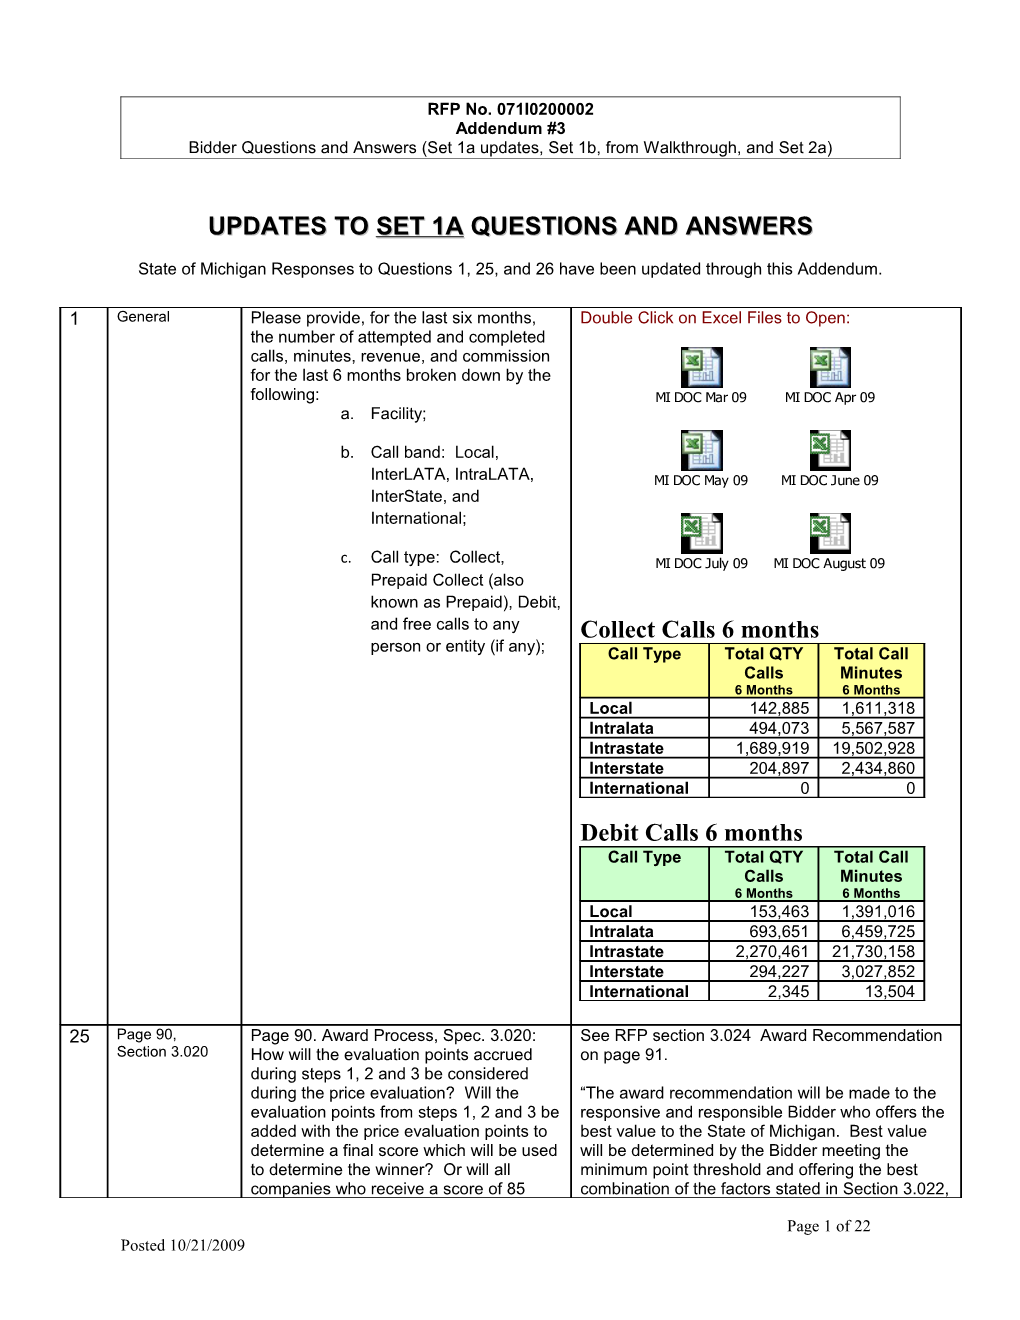 Updates to Set 1A Questions and Answers